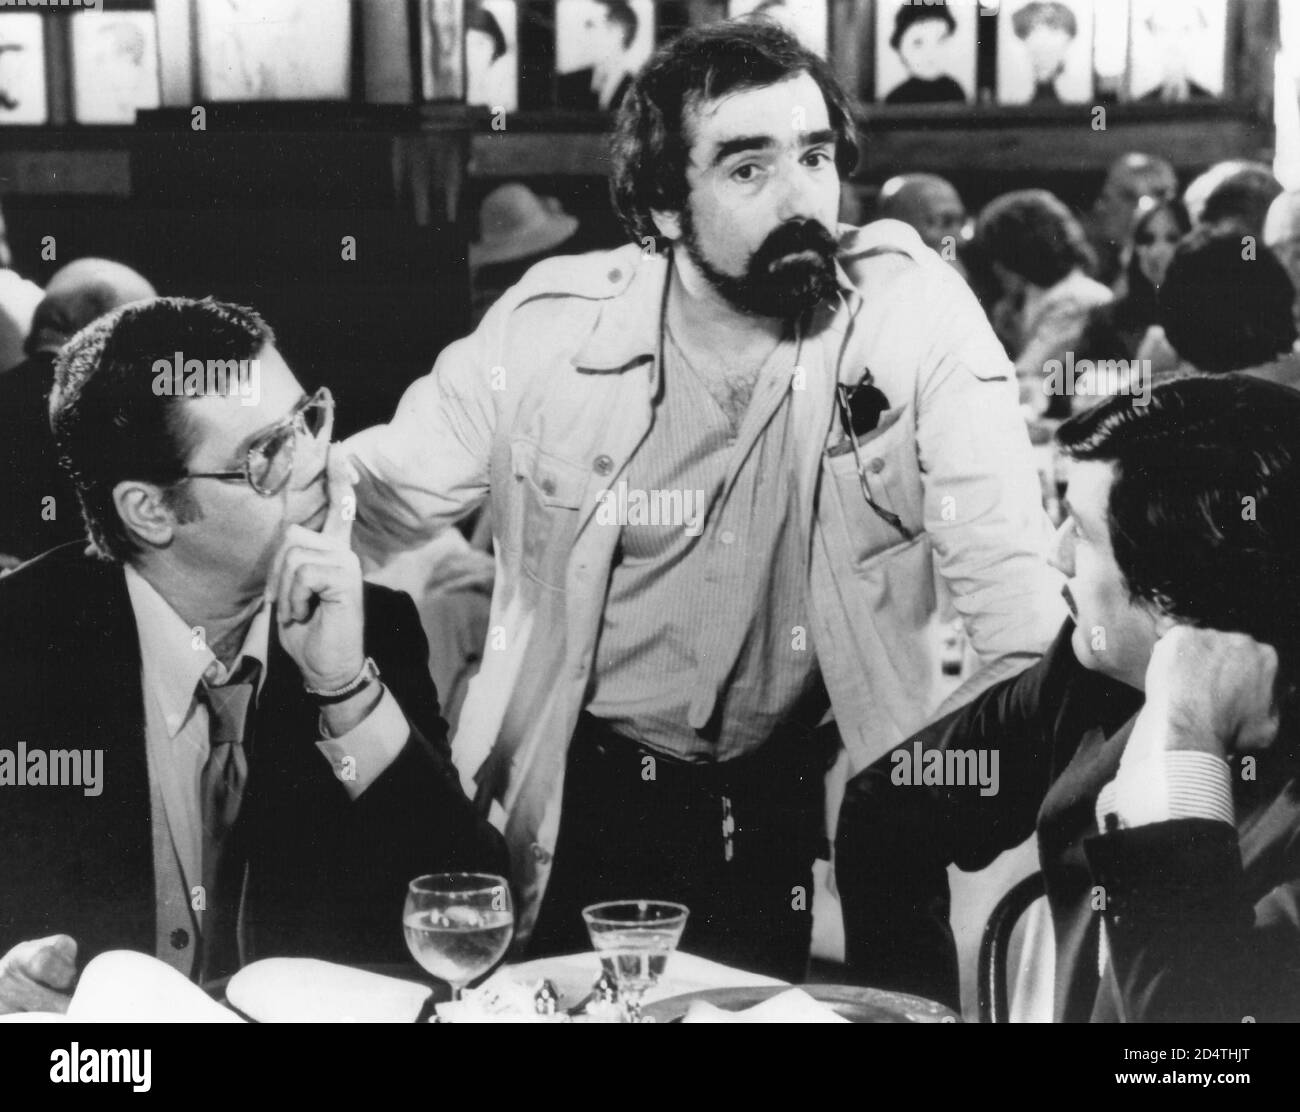 JERRY LEWIS, MARTIN SCORSESE and ROBERT DE NIRO in THE KING OF COMEDY (1982), directed by MARTIN SCORSESE. Copyright: Editorial use only. No merchandising or book covers. This is a publicly distributed handout. Access rights only, no license of copyright provided. Only to be reproduced in conjunction with promotion of this film. Credit: 20TH CENTURY FOX / Album Stock Photo